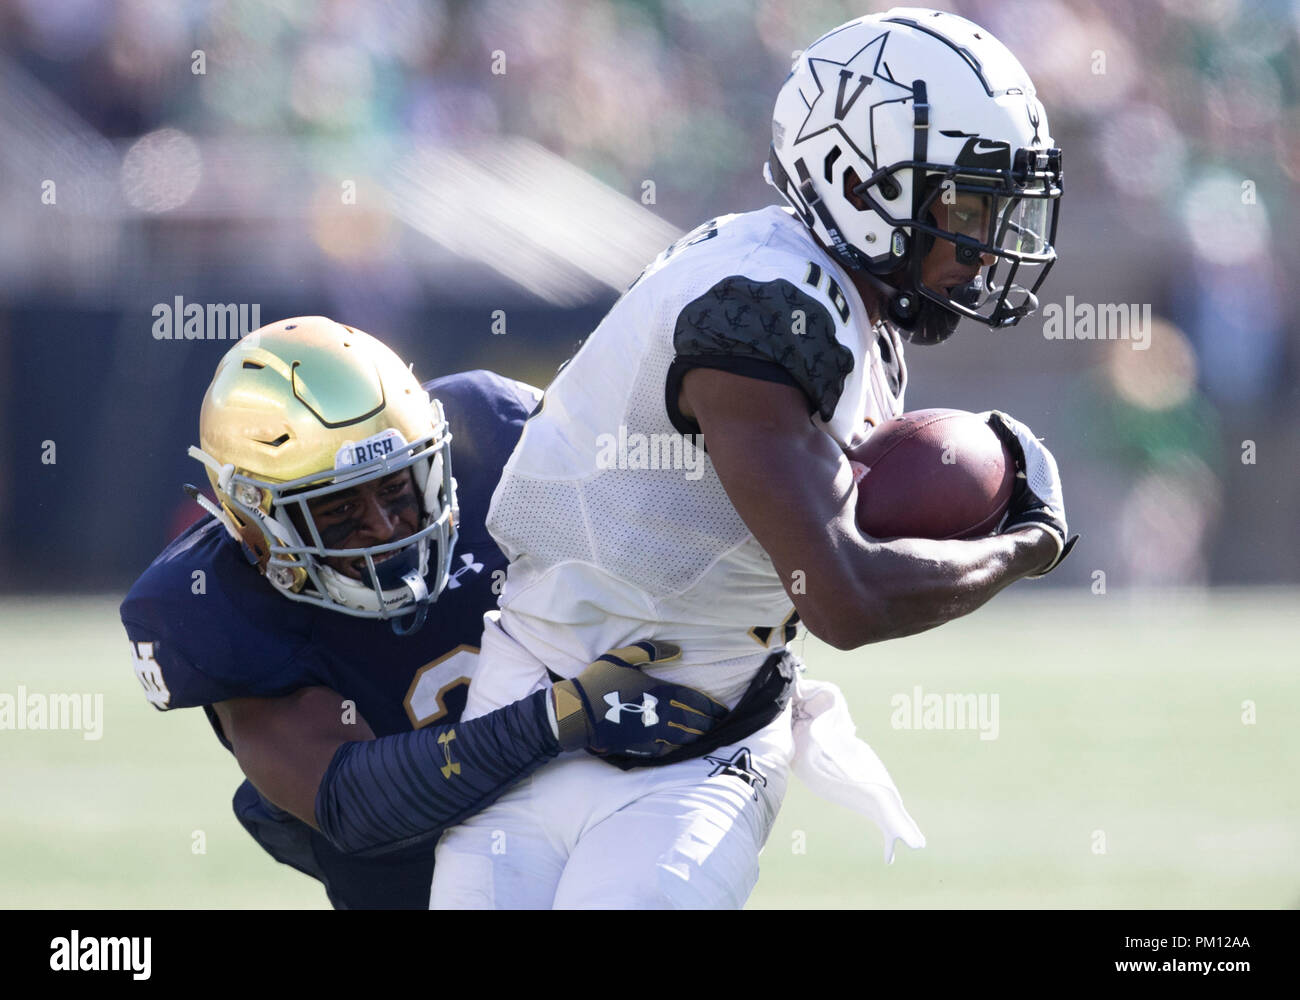 South Bend, Indiana, USA. 15th Sep, 2018. Notre Dame defensive back Houston Griffith (3) makes the tackle on Vanderbilt wide receiver Kalija Lipscomb (16) during NCAA football game action between the Vanderbilt Commodores and the Notre Dame Fighting Irish at Notre Dame Stadium in South Bend, Indiana. Notre Dame defeated Vanderbilt 22-17. John Mersits/CSM/Alamy Live News Stock Photo